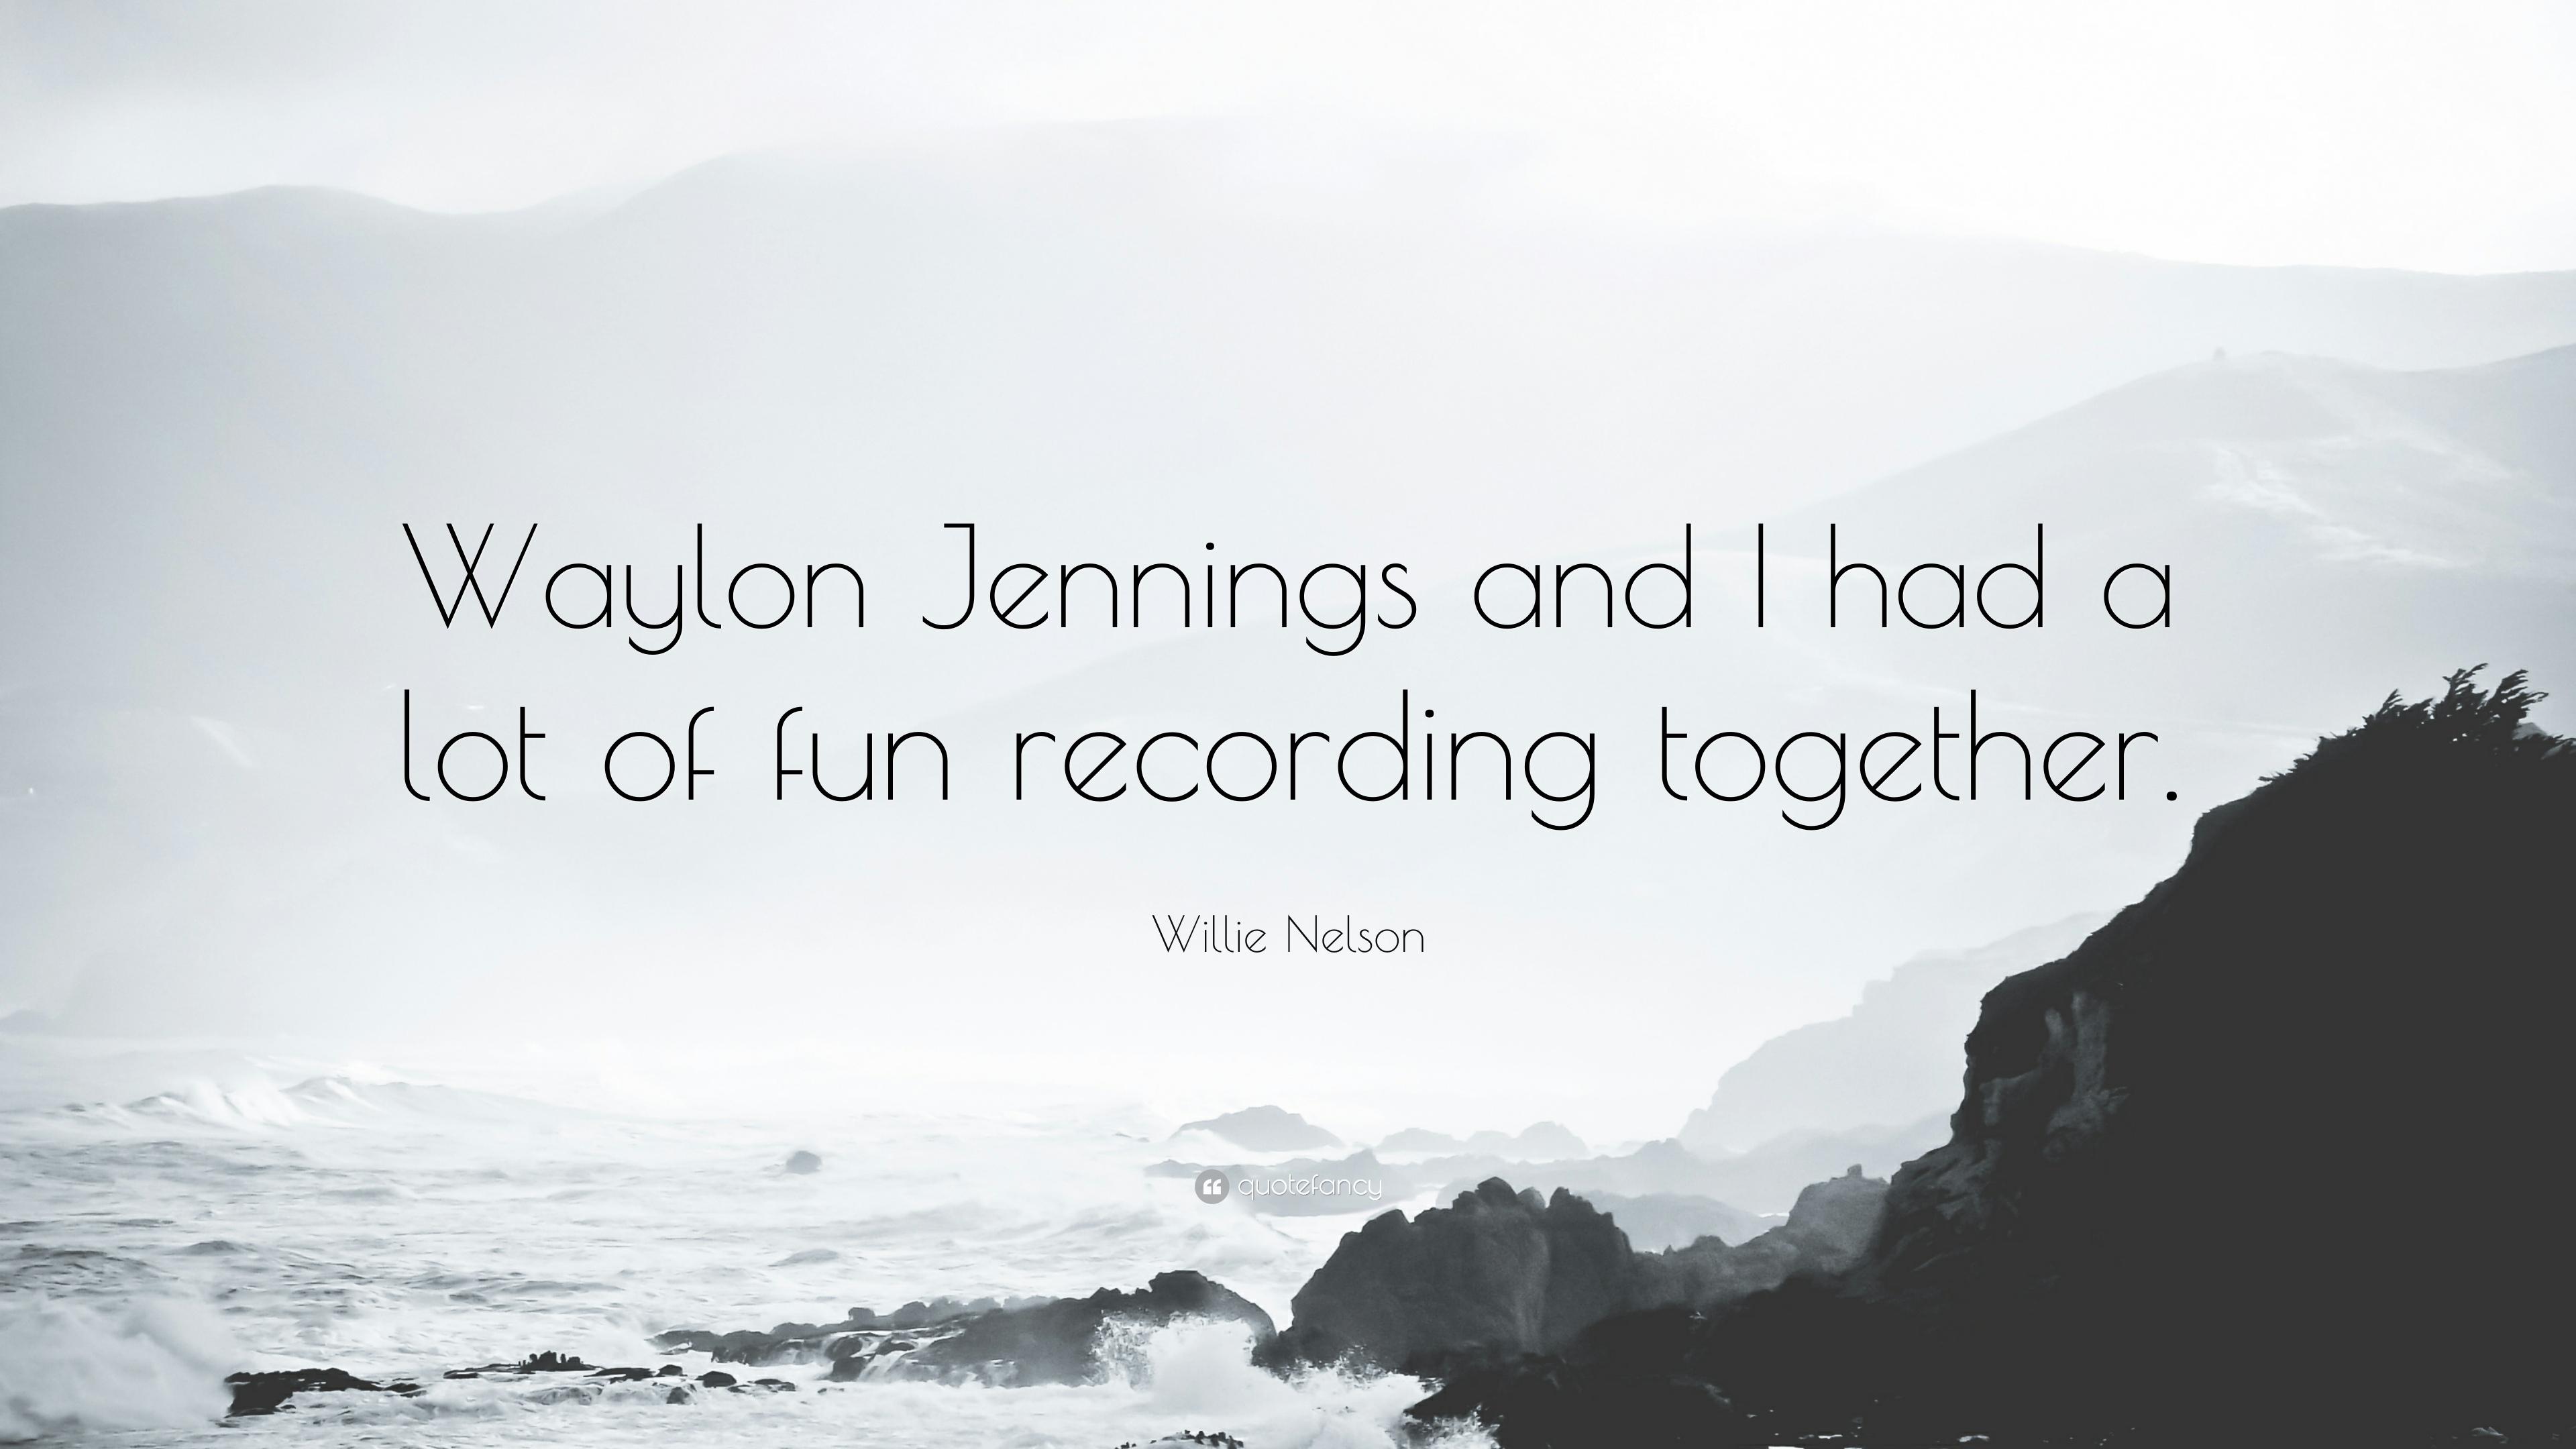 Willie Nelson Quote: “Waylon Jennings and I had a lot of fun